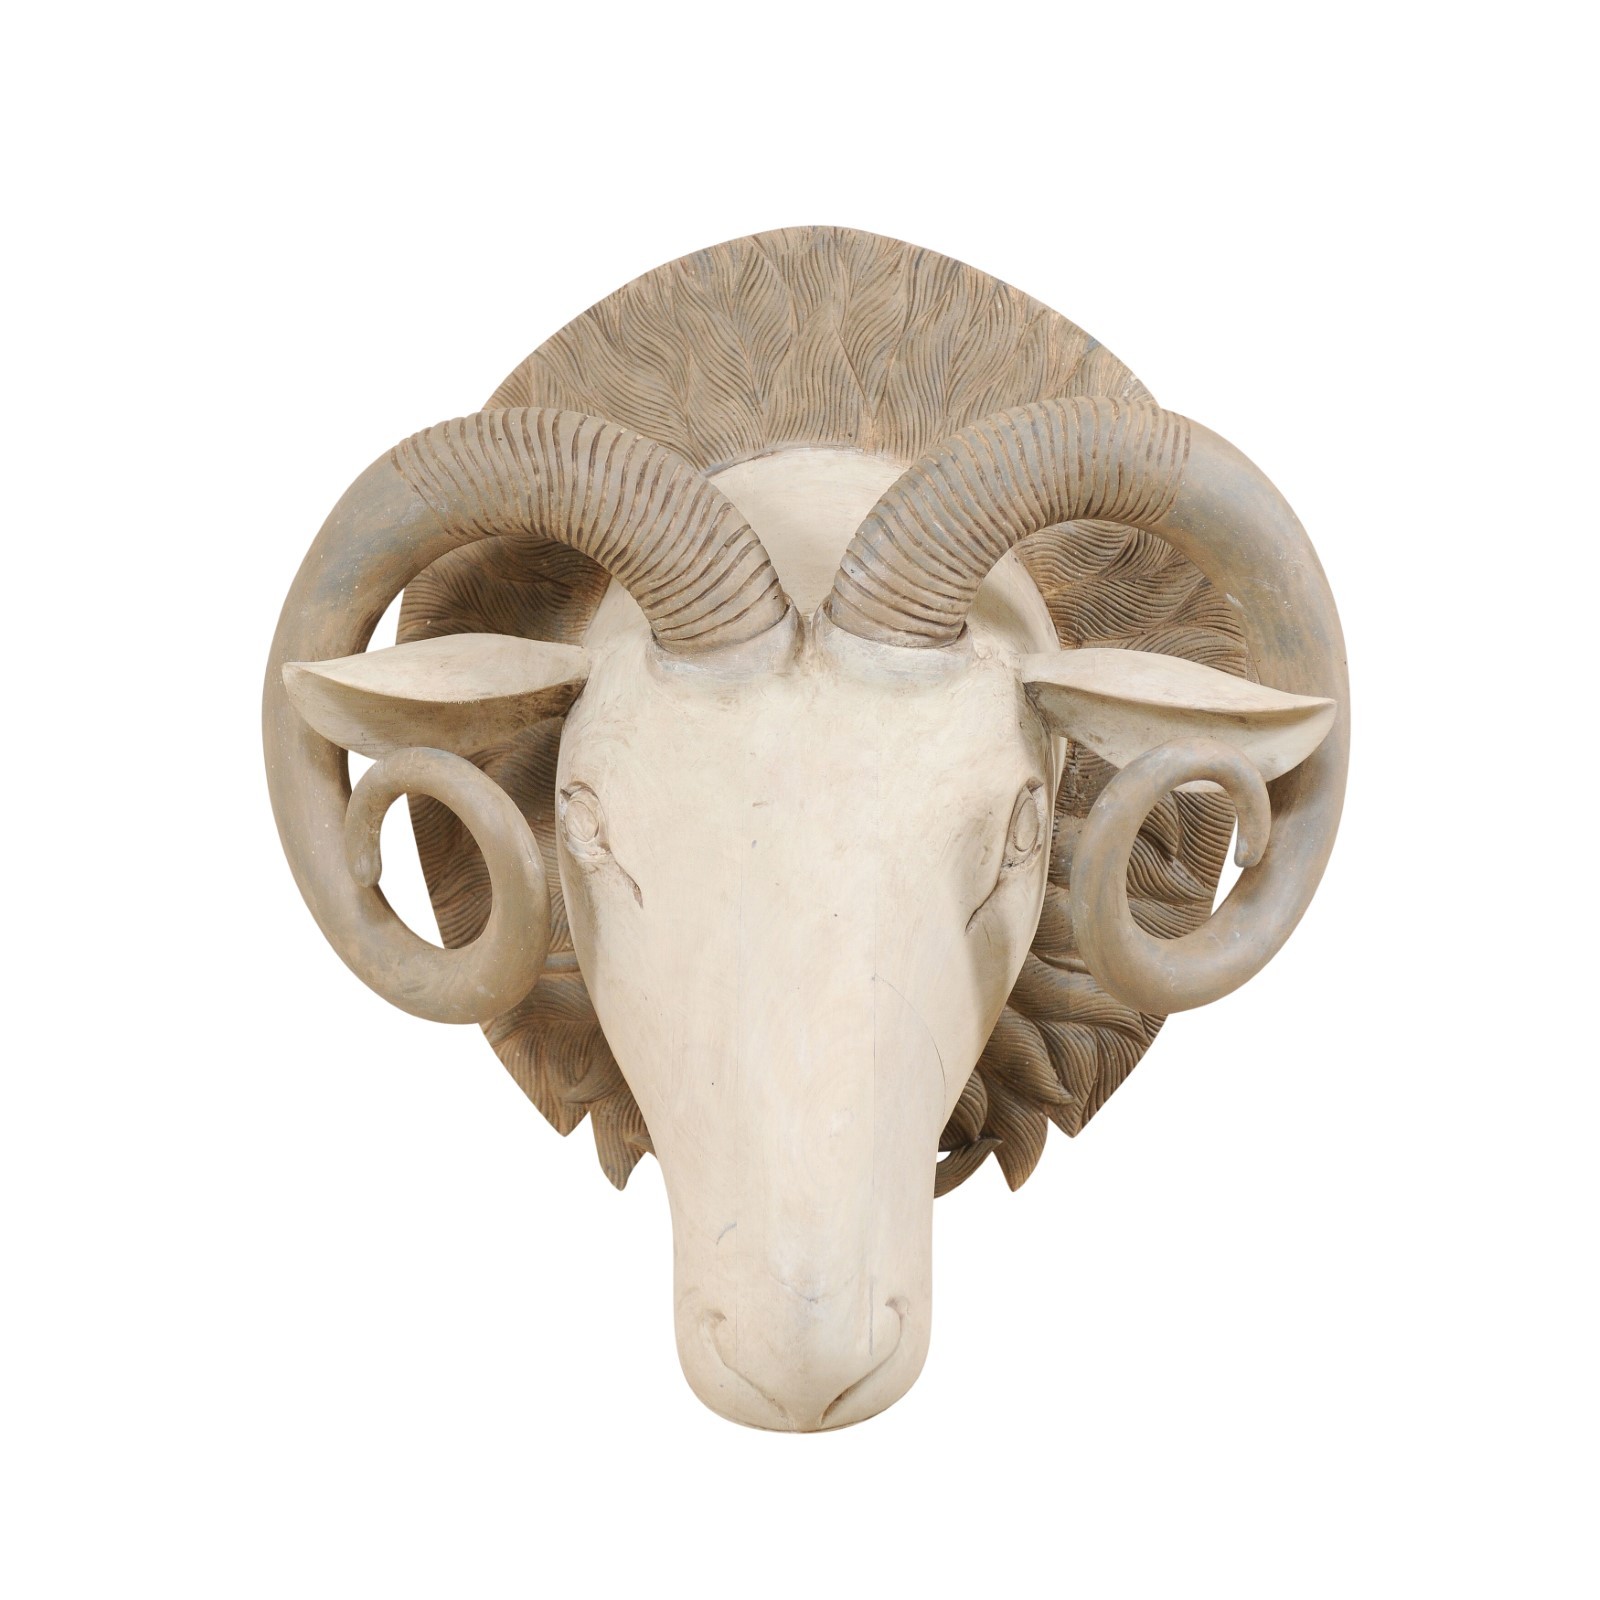 Hand-Carved Wooden Ram's Head Wall Ornament